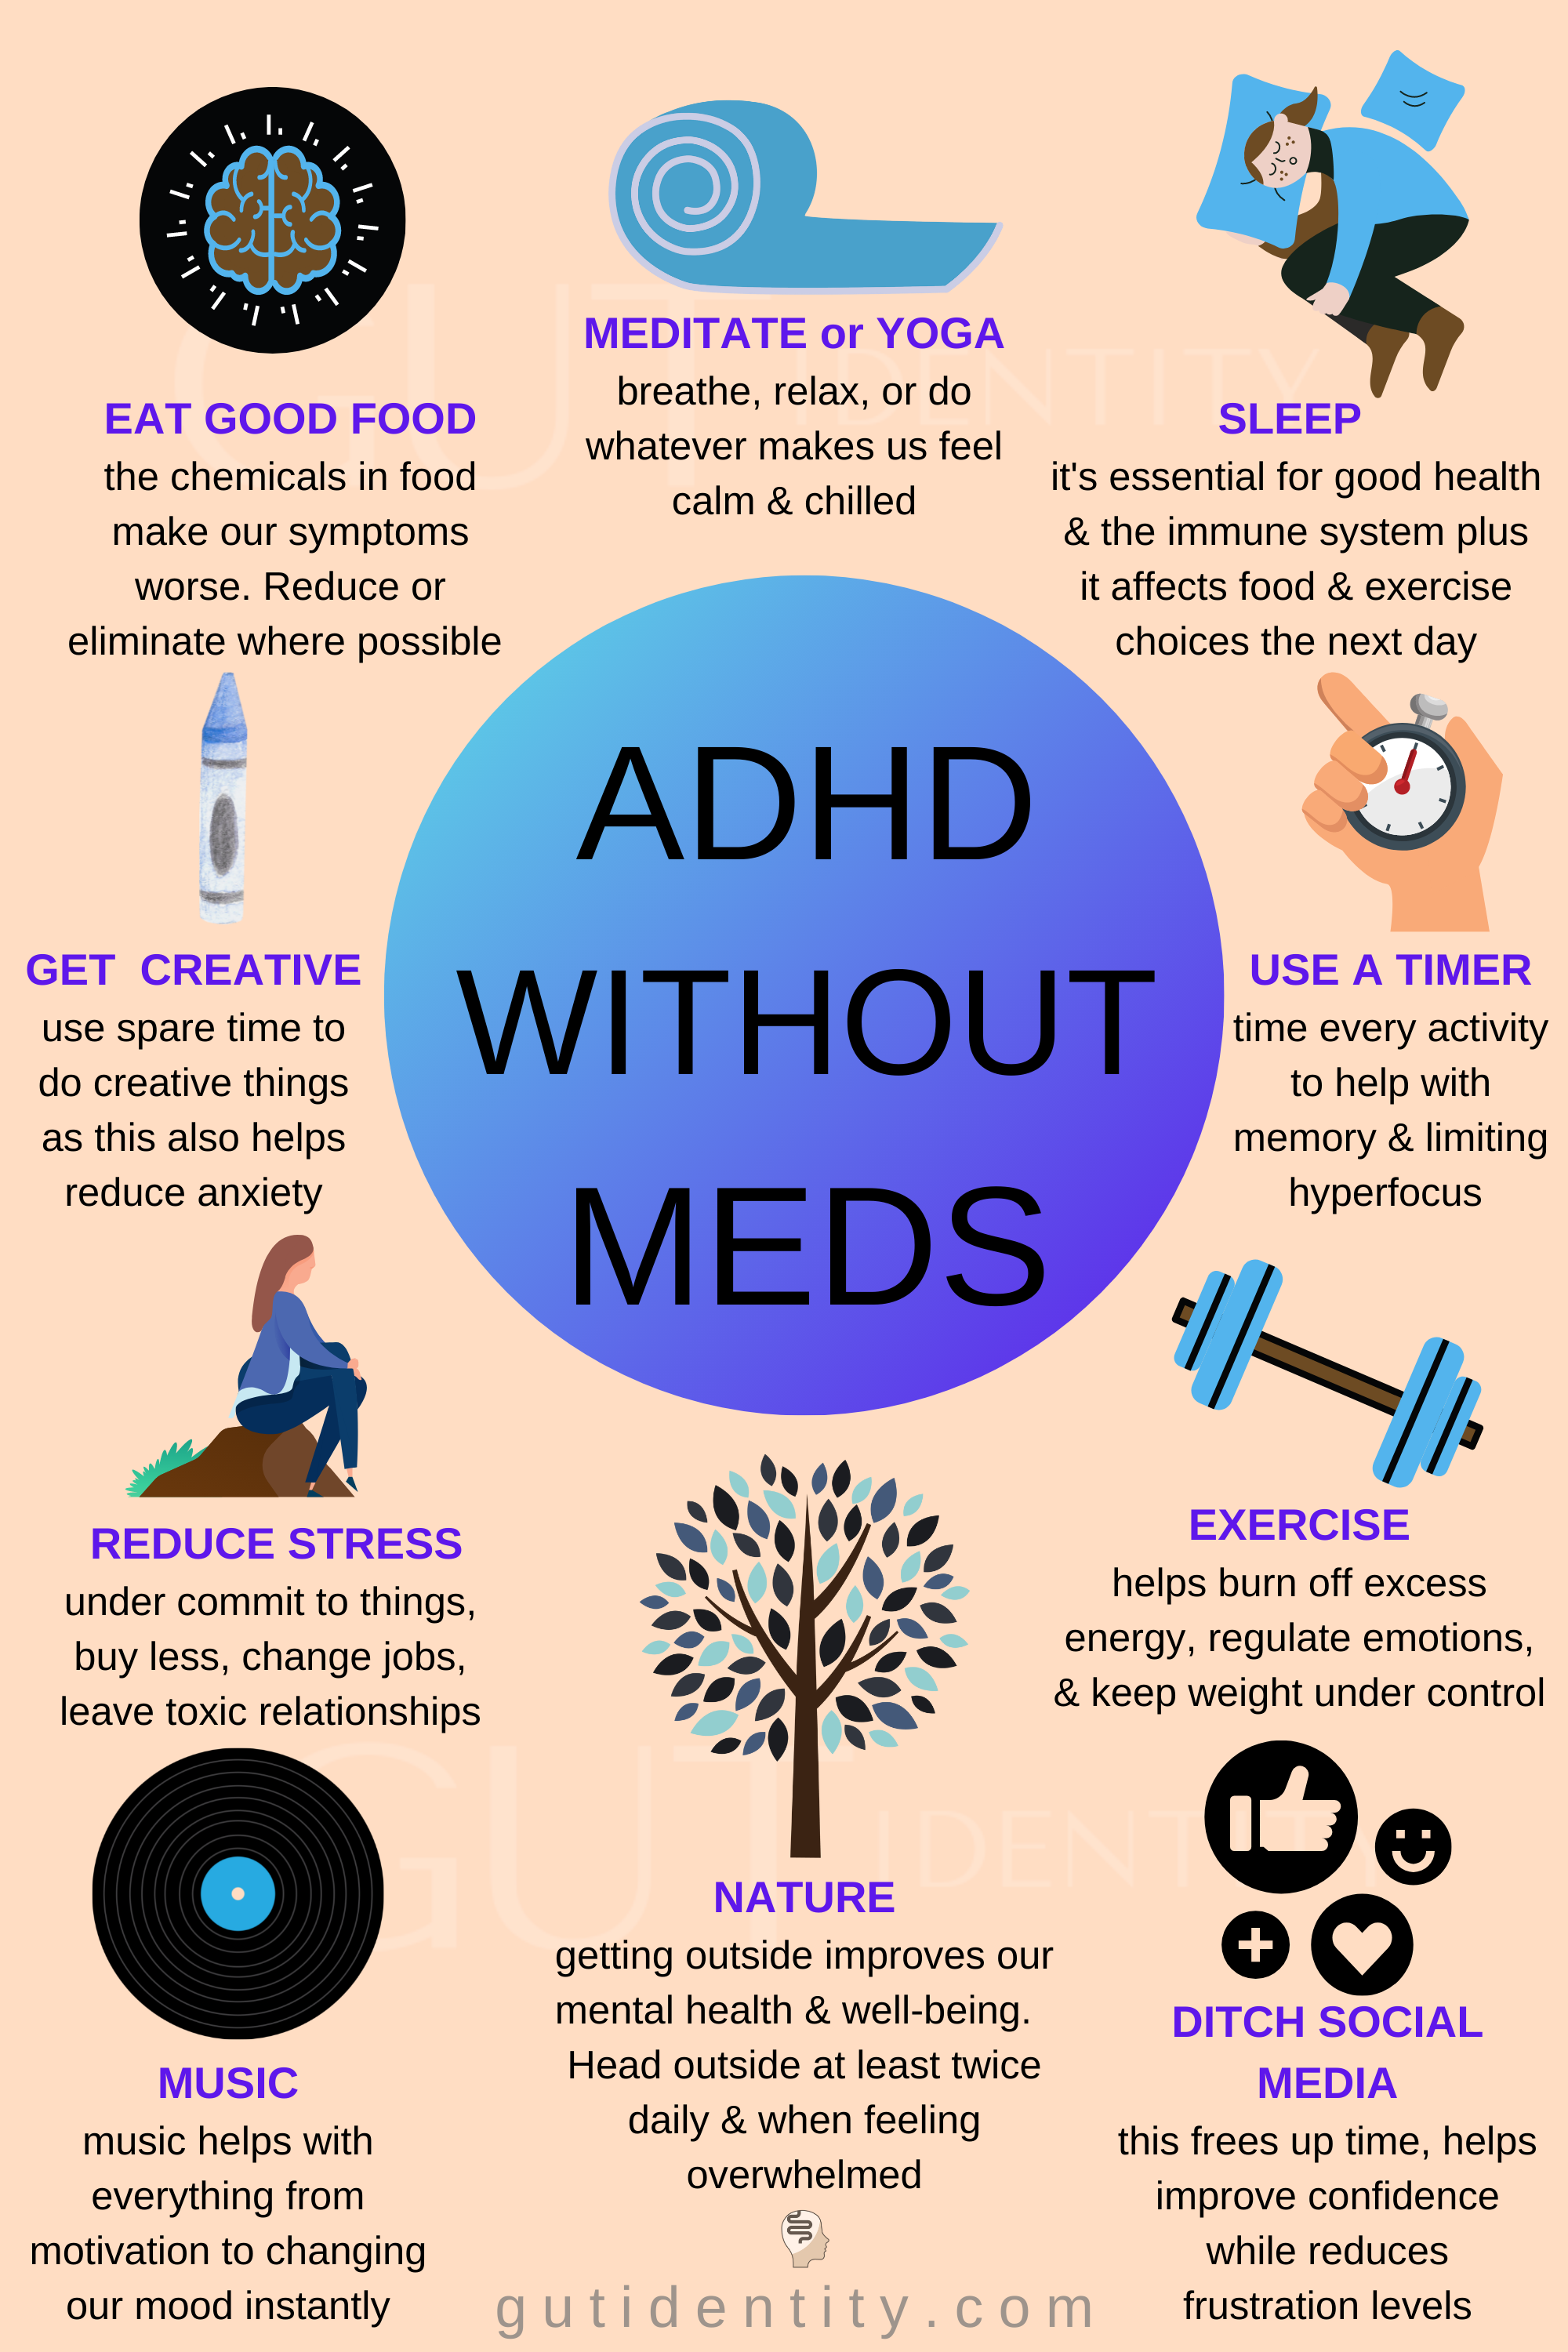 Managing ADHD without Medication by Gutidentity